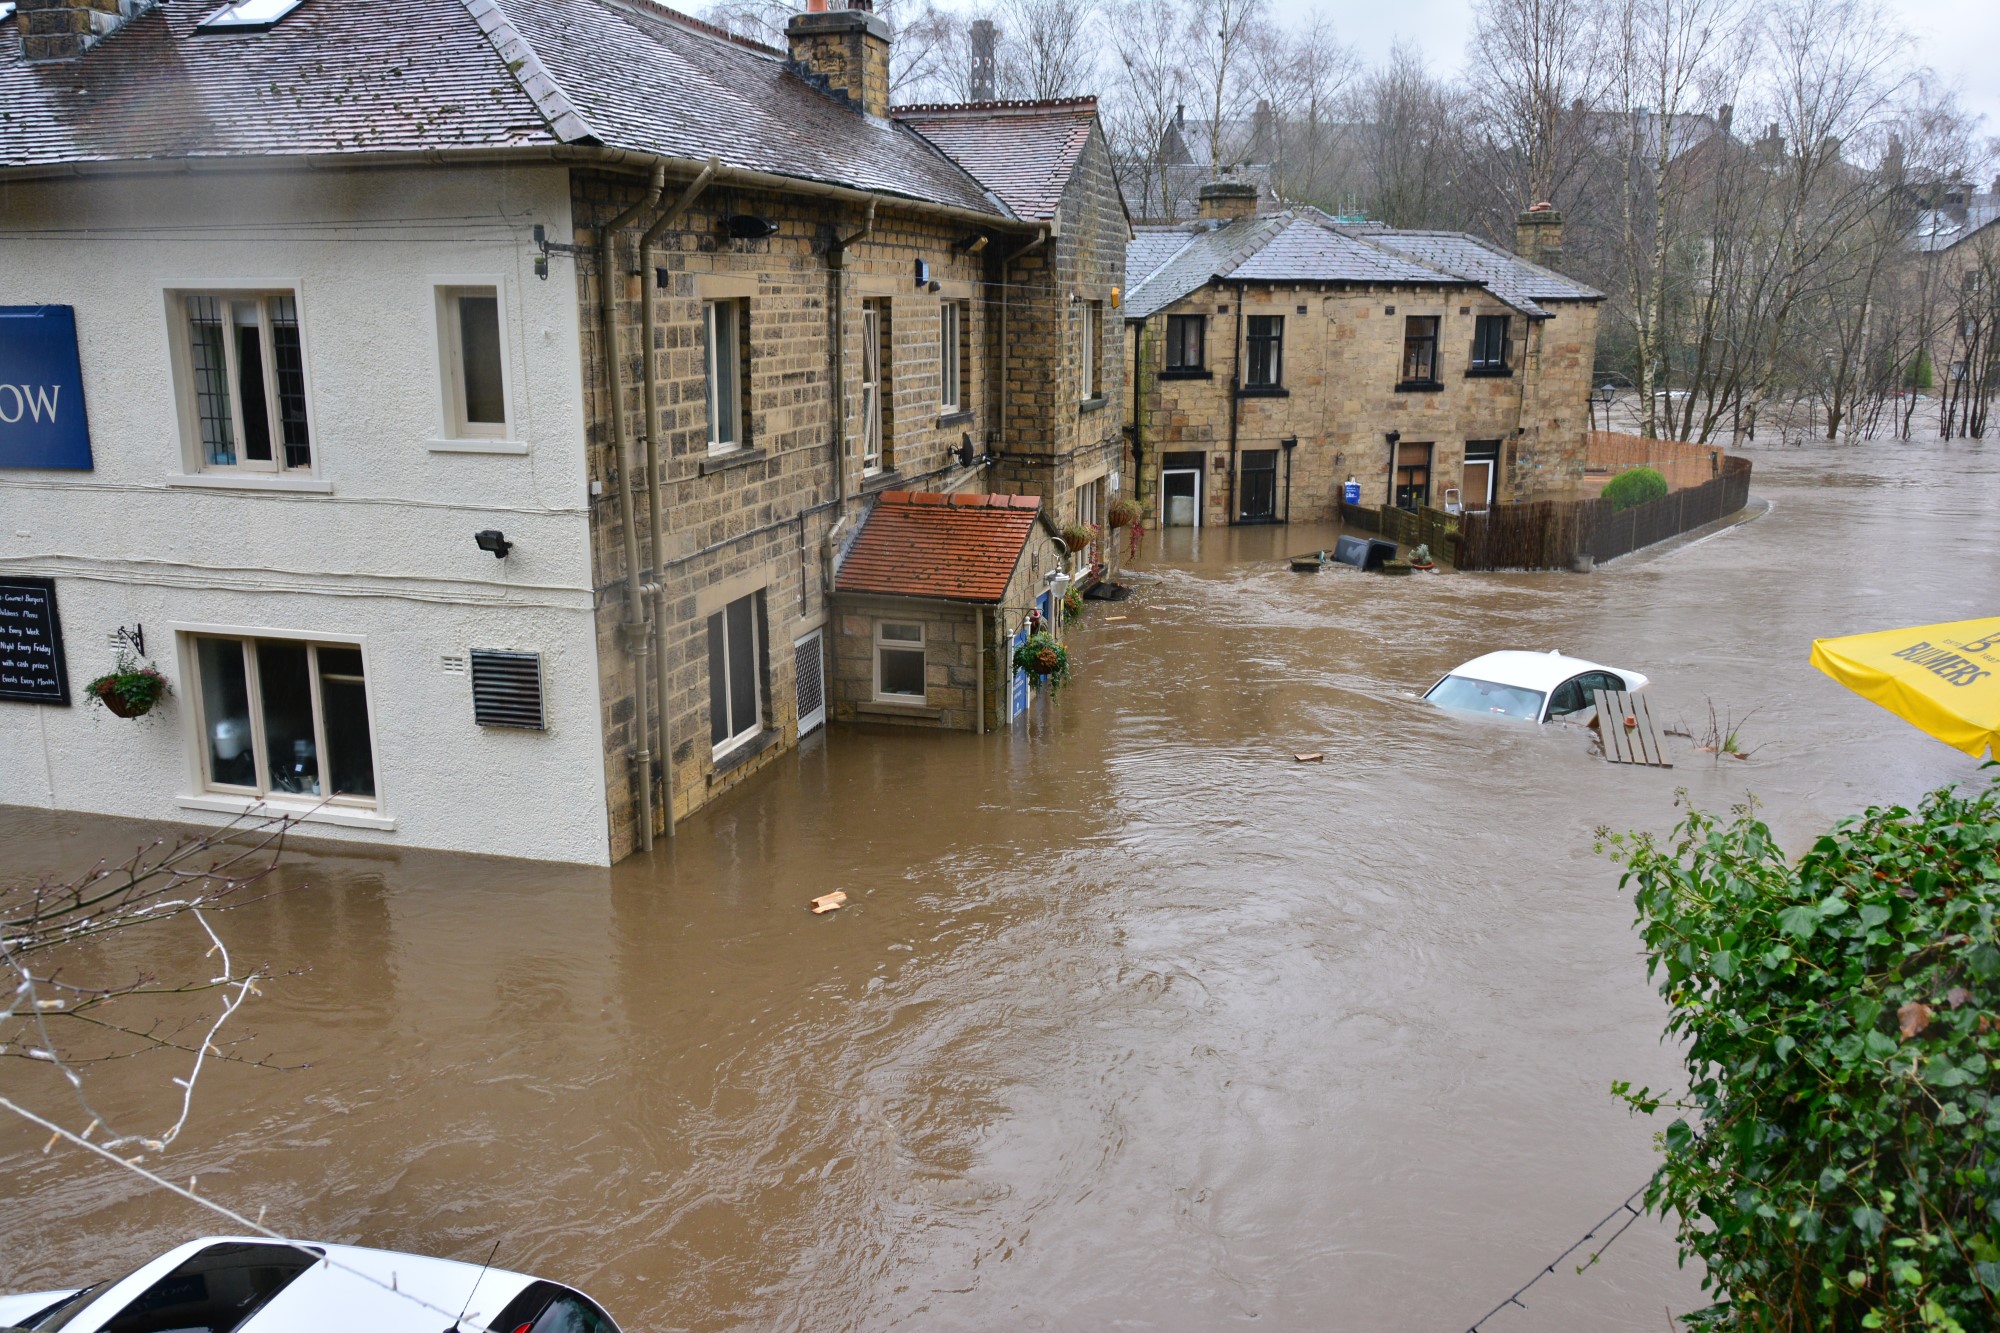 UK Flooding Set to Rise - 1 in 6 Properties at Risk - Water Resistant Safes